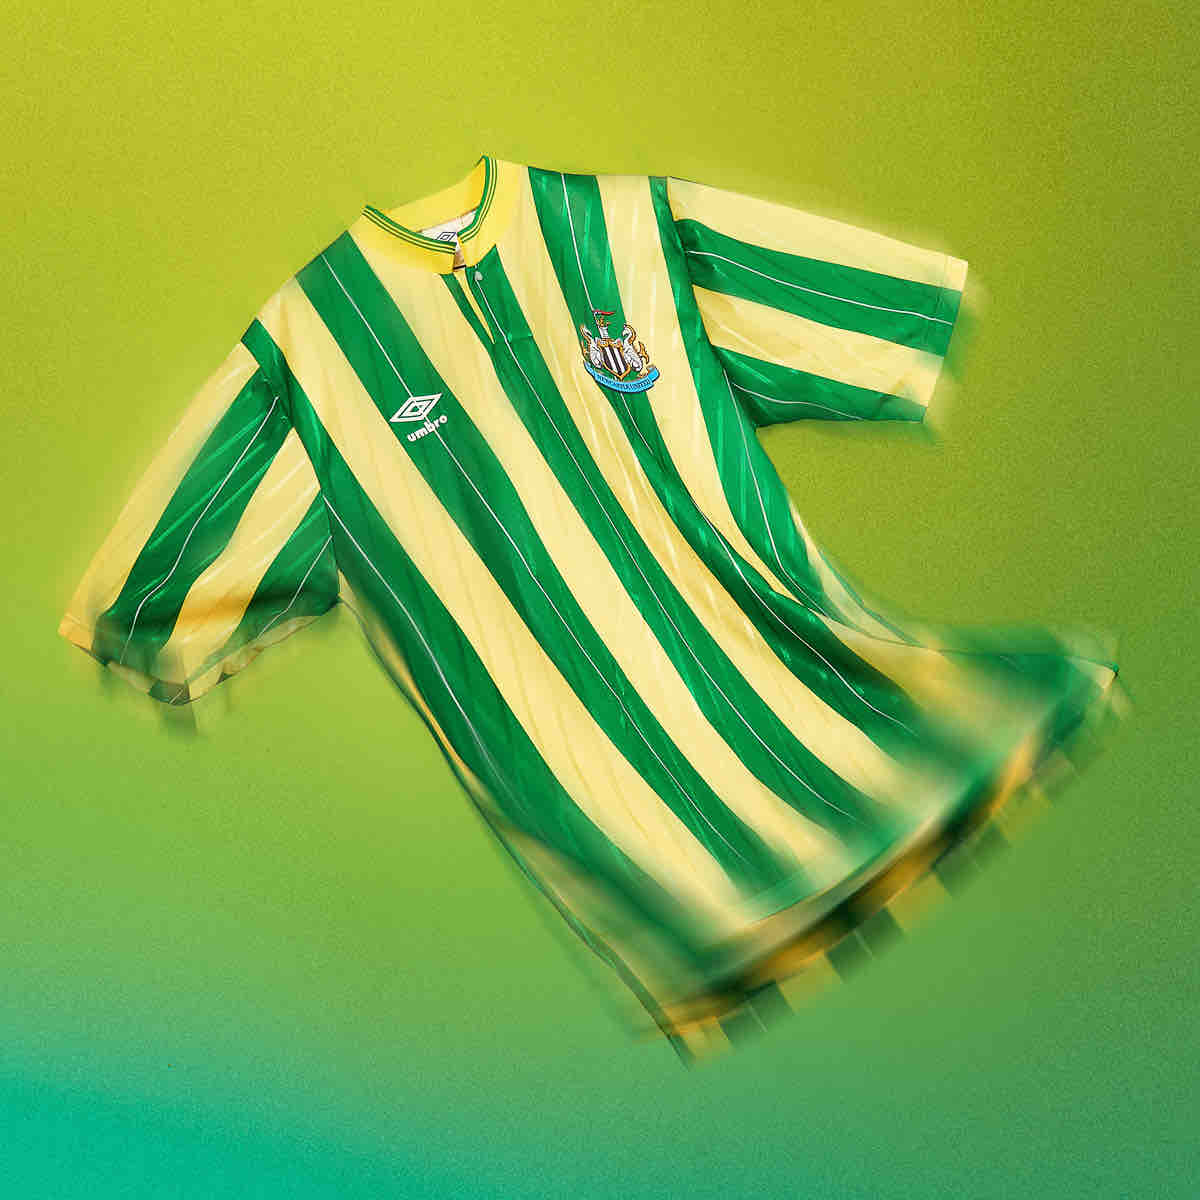 Classic Football Shirts on X: We are thrilled to share with you